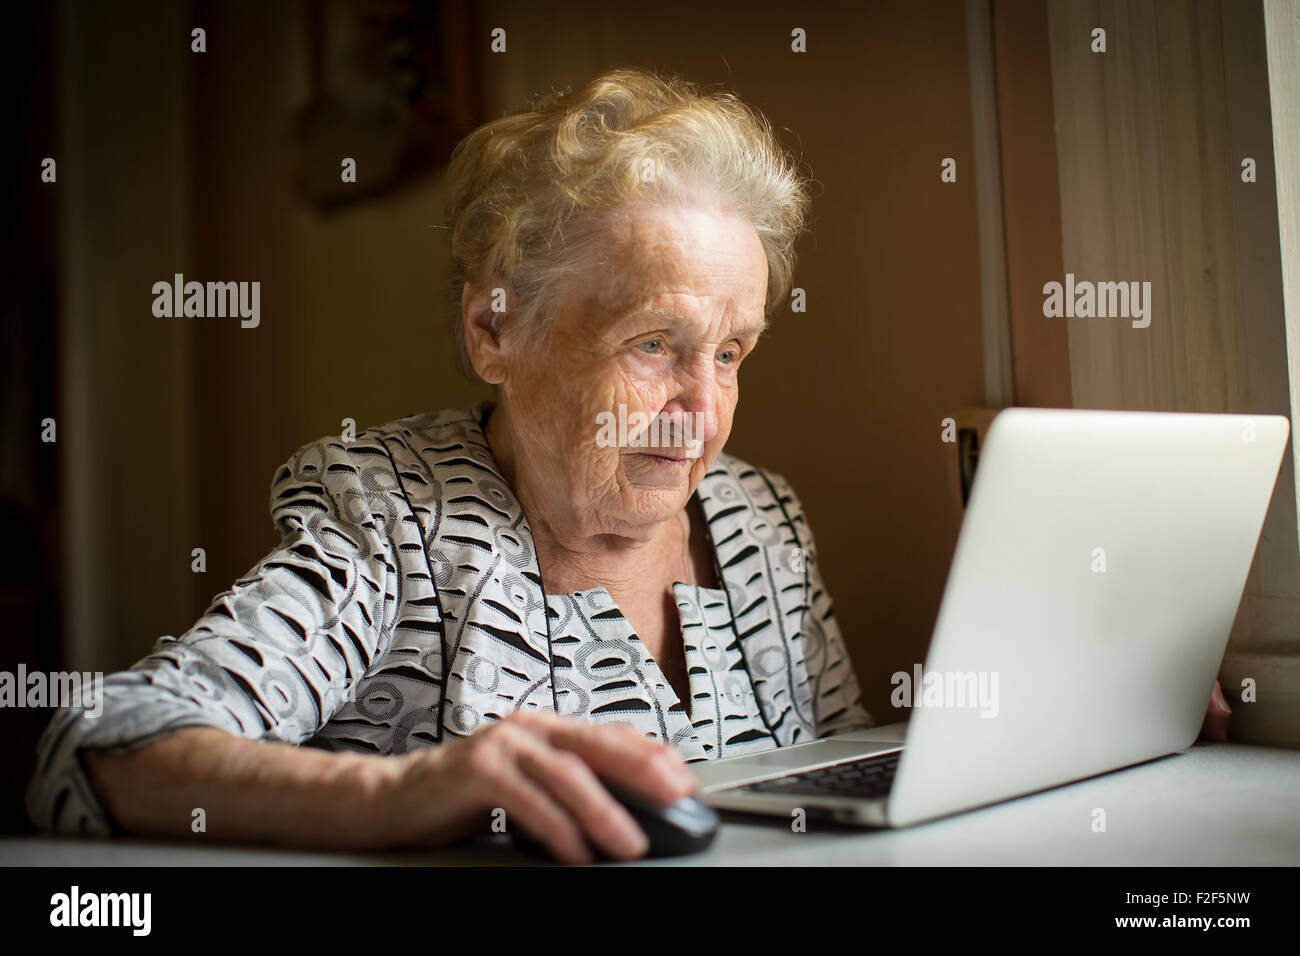 Old woman sitting with laptop at table in his house. Stock Photo